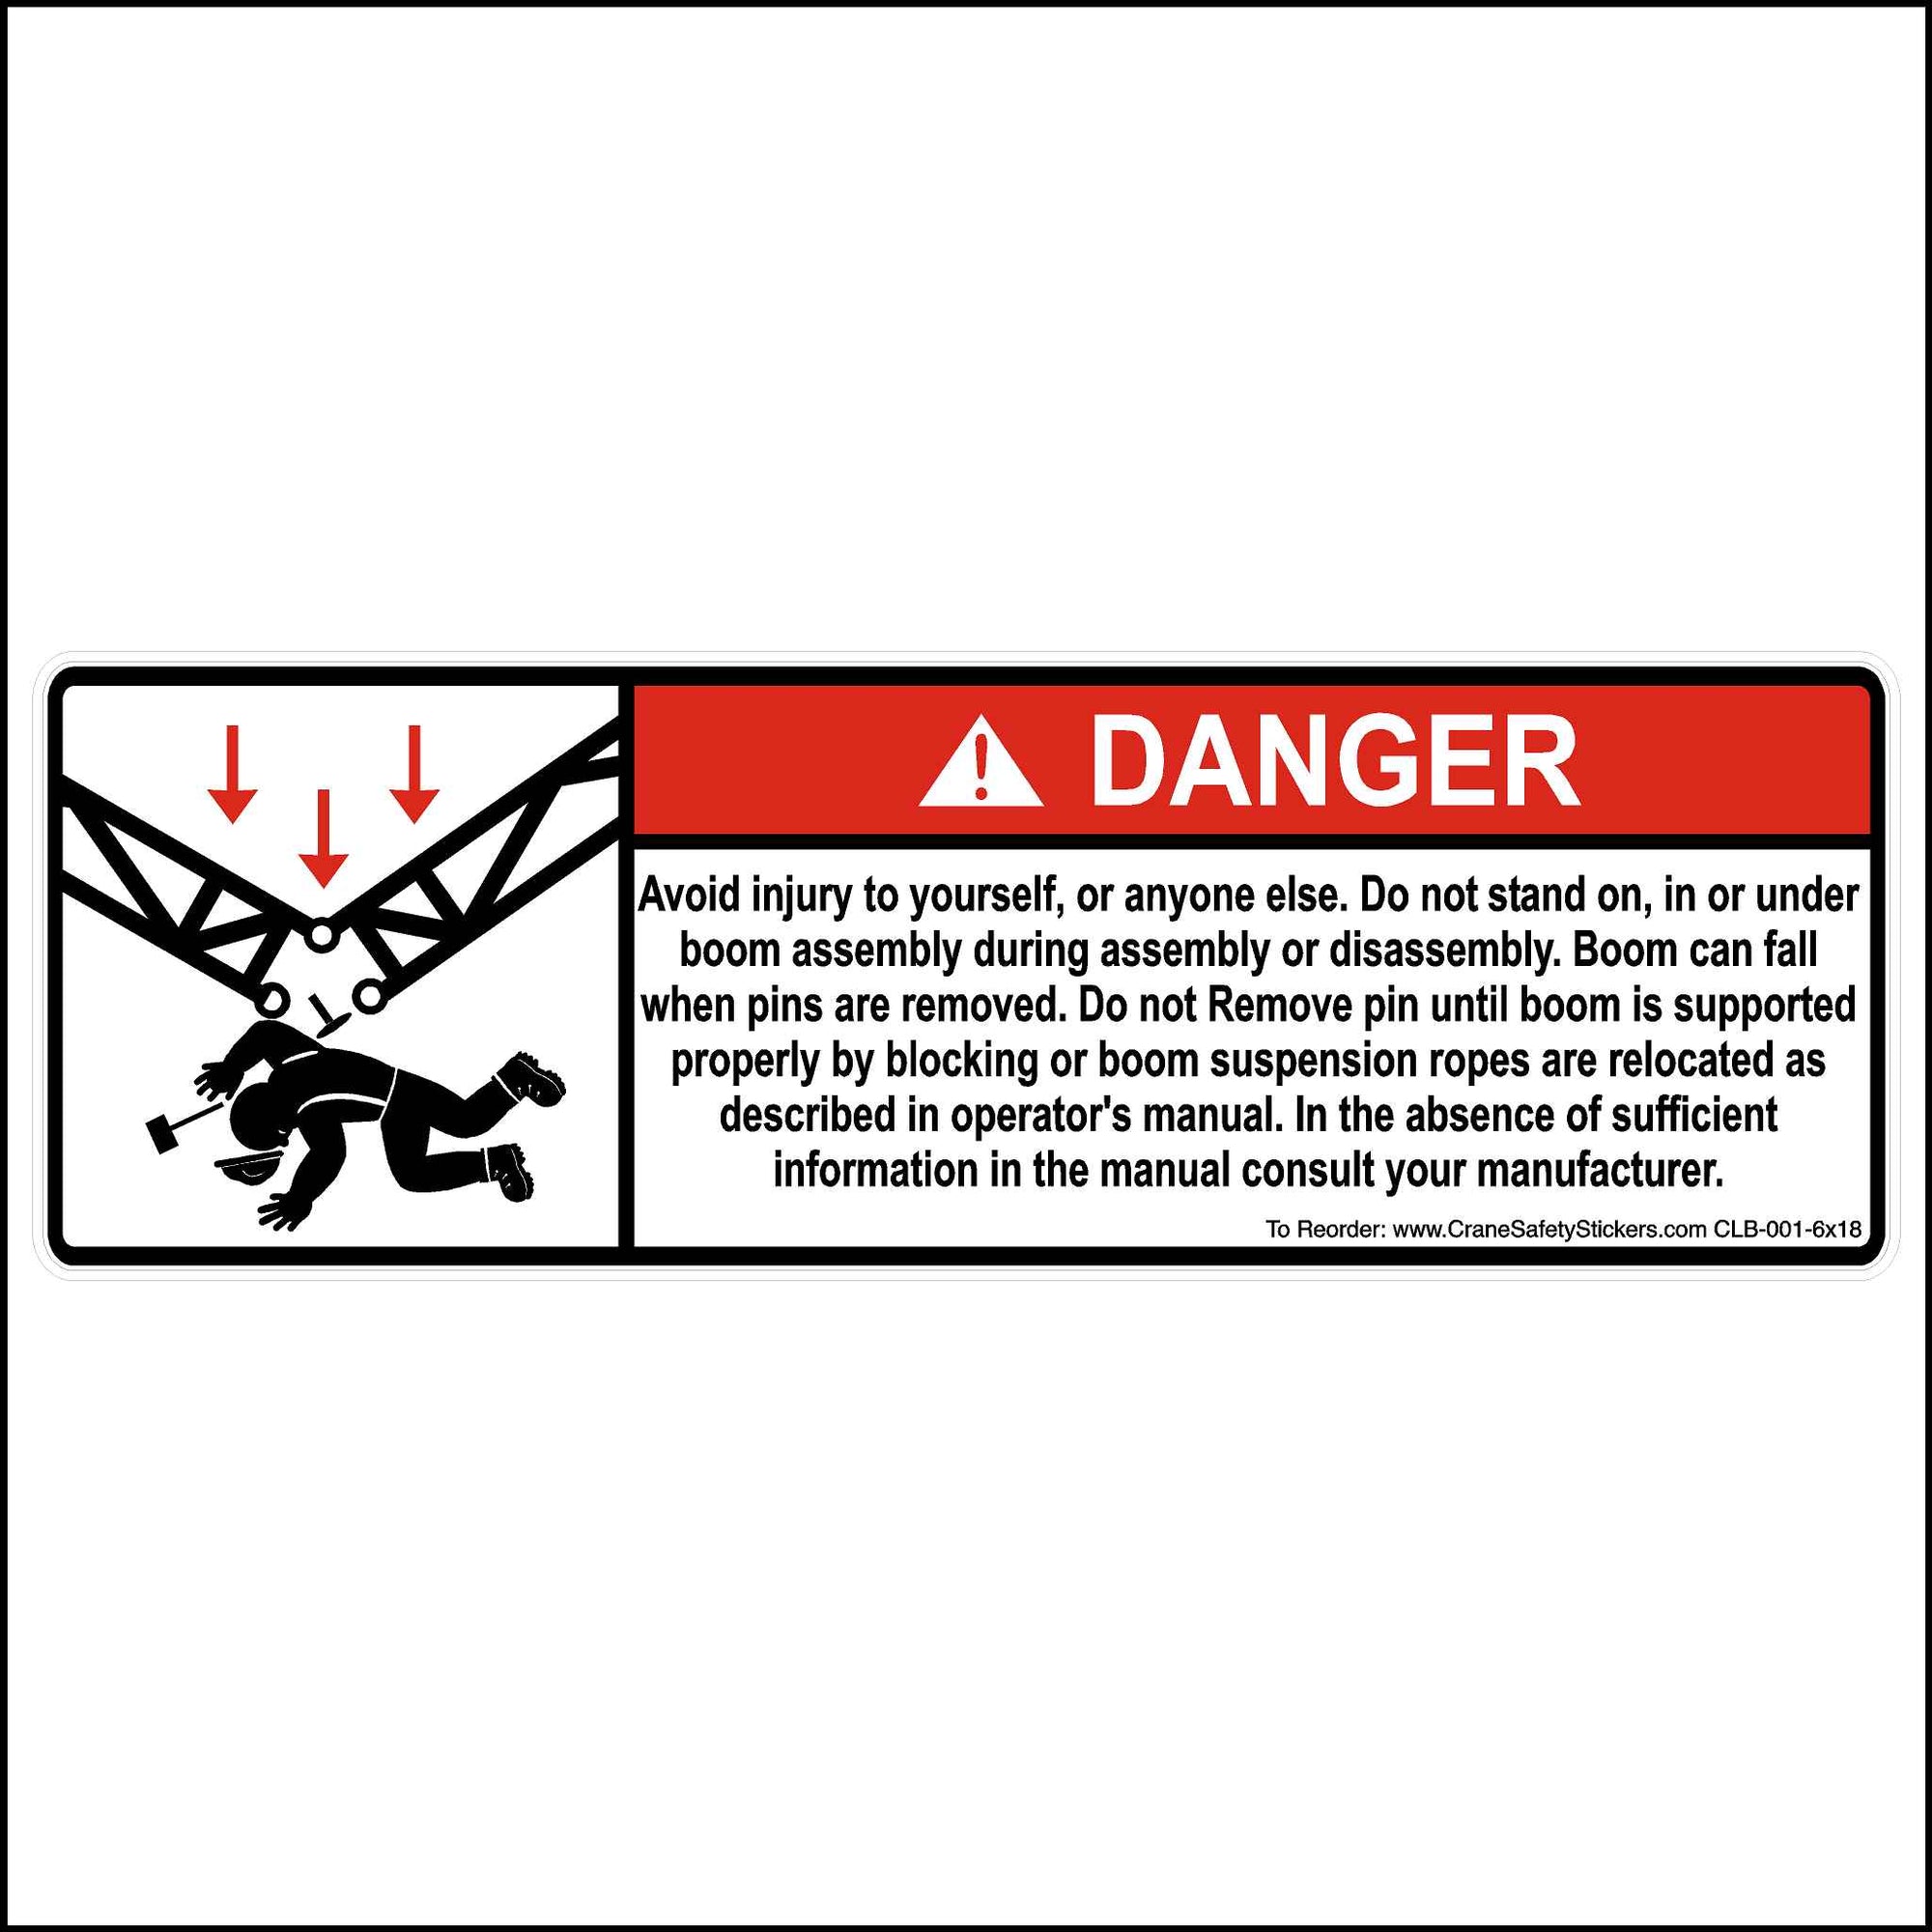 3x9 Inch Lattice Boom Safety Sticker Printed With, DANGER, Avoid injury to yourself, or anyone else. Do not stand on, in or under boom assembly during assembly or disassembly. Boom can fall when pins are removed. Do not Remove pin until boom is supported properly by blocking or boom suspension ropes are relocated as described in operator's manual. In the absence of sufficient information in the manual consult your manufacturer.